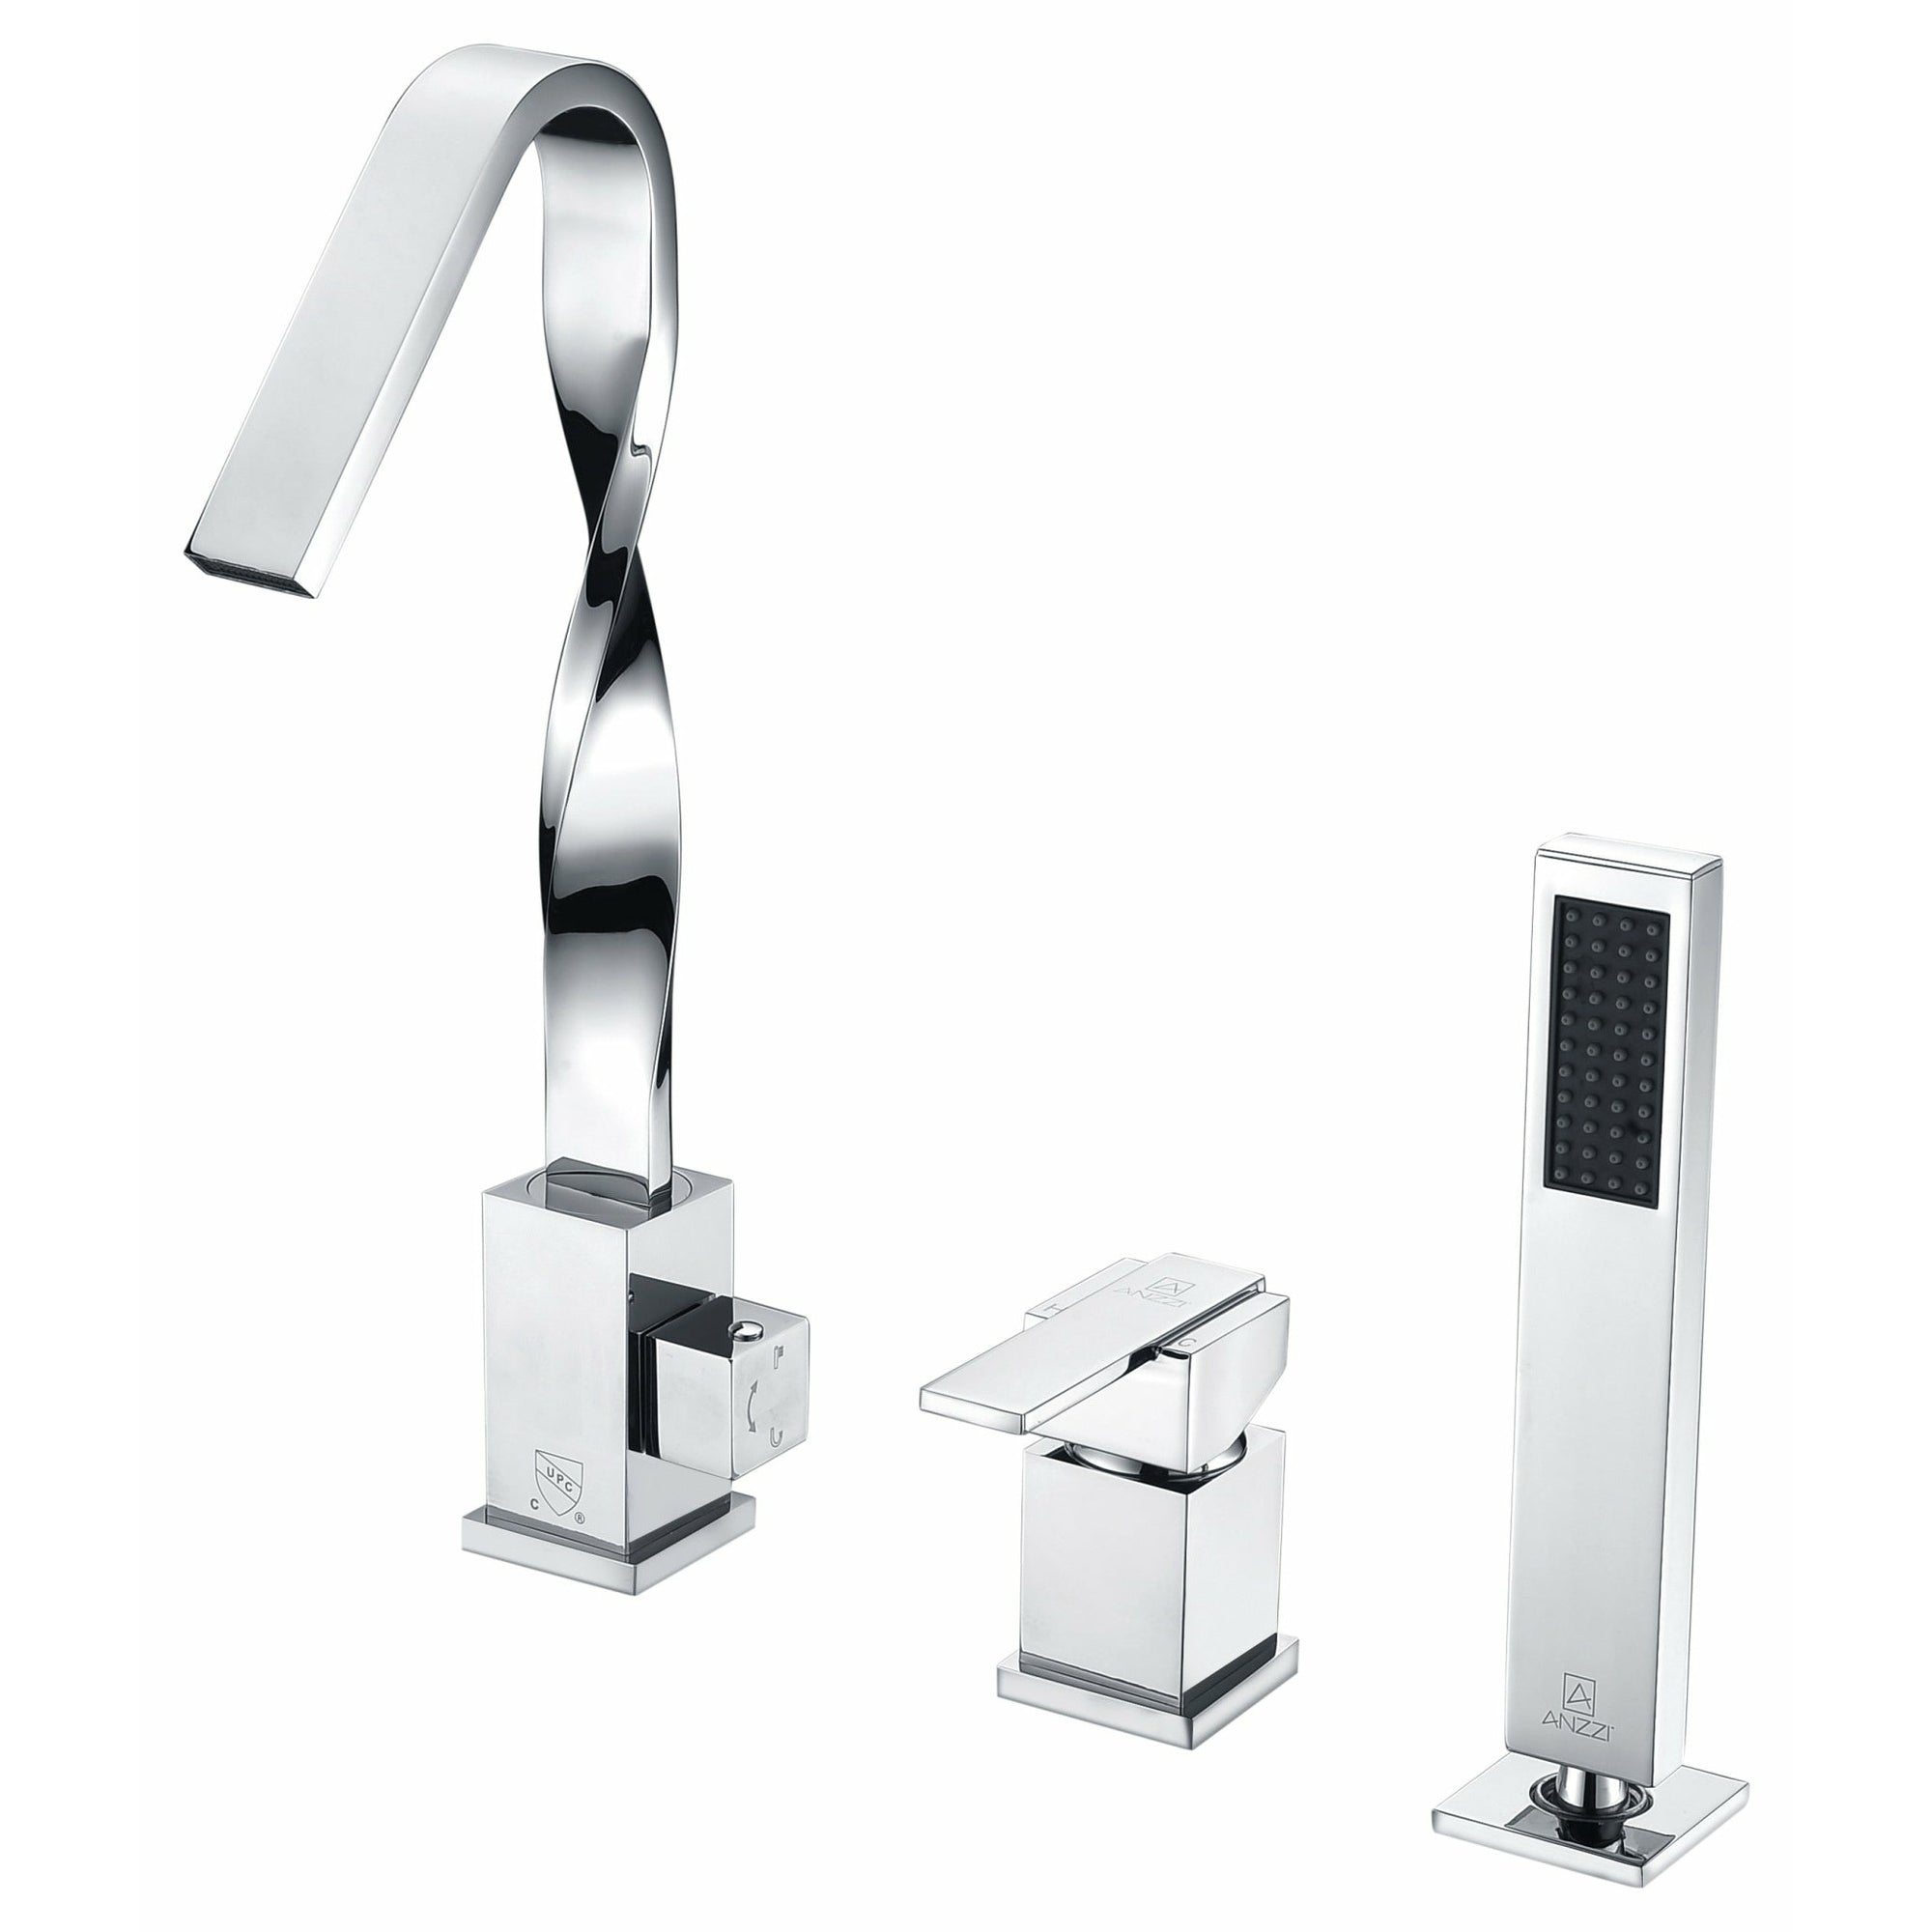 Anzzi Alamere Single-handle Deck-mount Roman Tub Faucet in Chrome - High Arching Spout and Sculpted Artisan Neck - Extendable Euro-grip Handheld Sprayer - Chrome Finish Housing a Solid Brass Interior - FR-AZ040CH - Vital Hydrotherapy